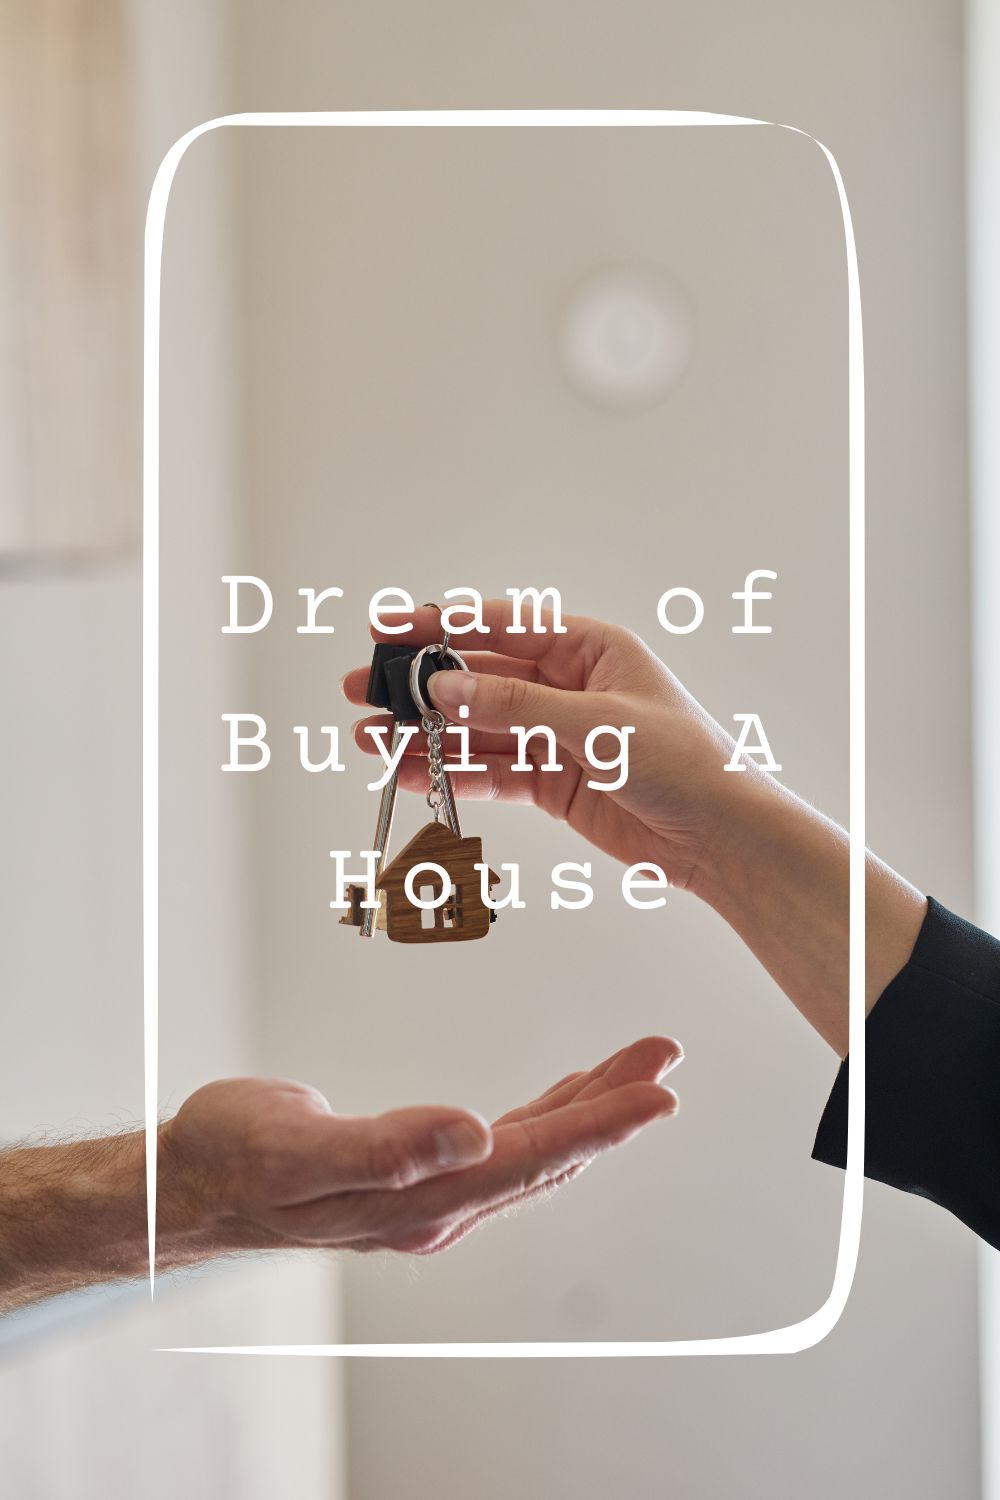 9 Dream of Buying A House Meanings4